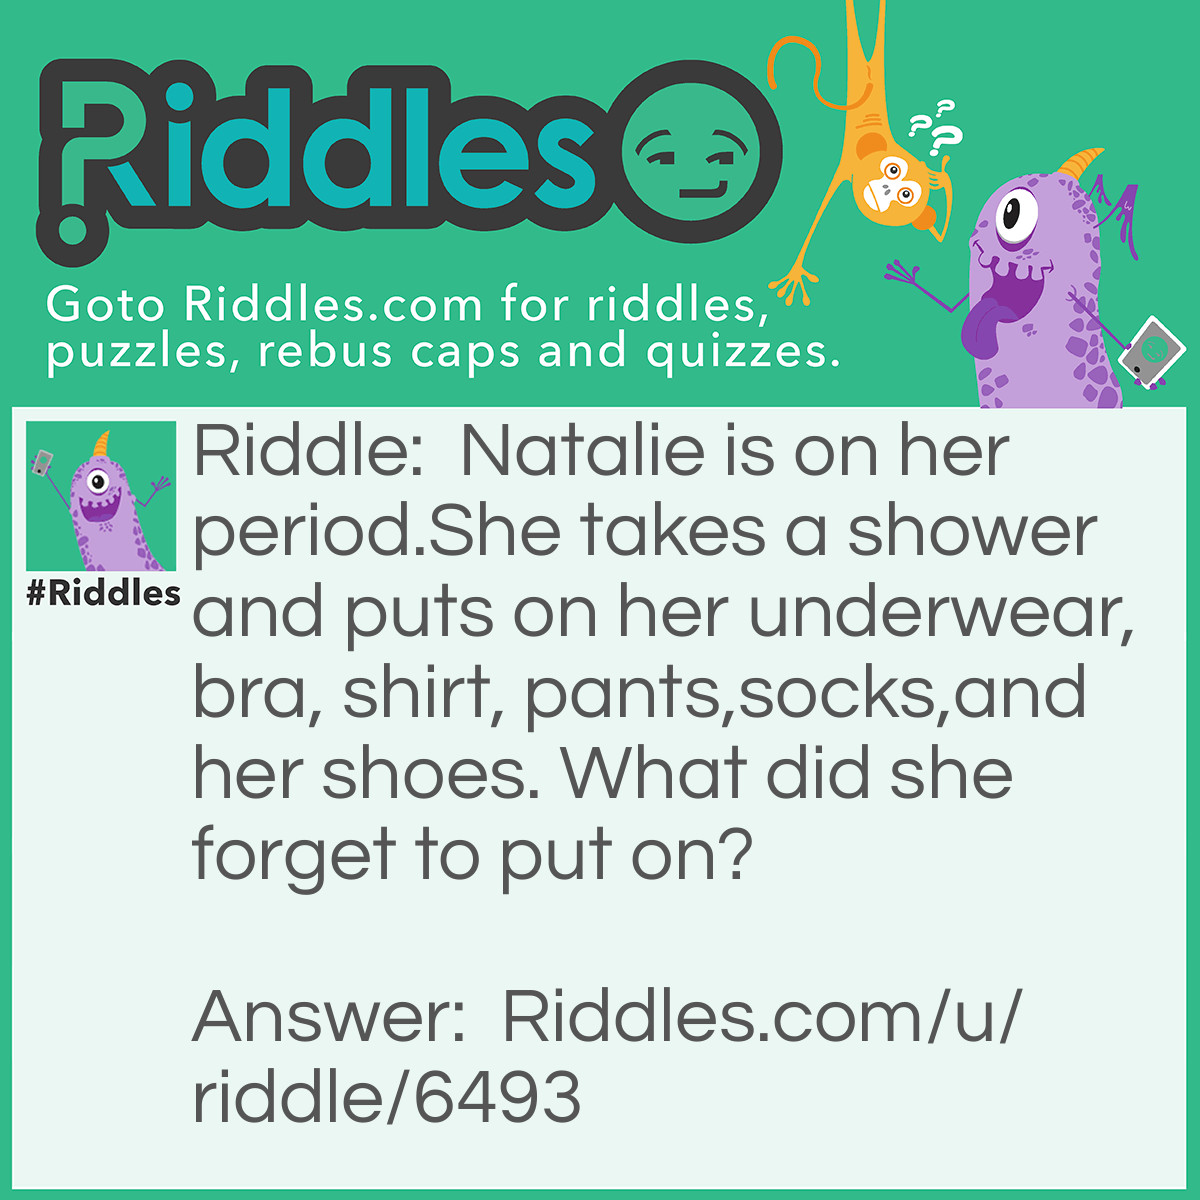 Riddle: Natalie is on her period.She takes a shower and puts on her underwear, bra, shirt, pants,socks,and her shoes. What did she forget to put on? Answer: Her pad.